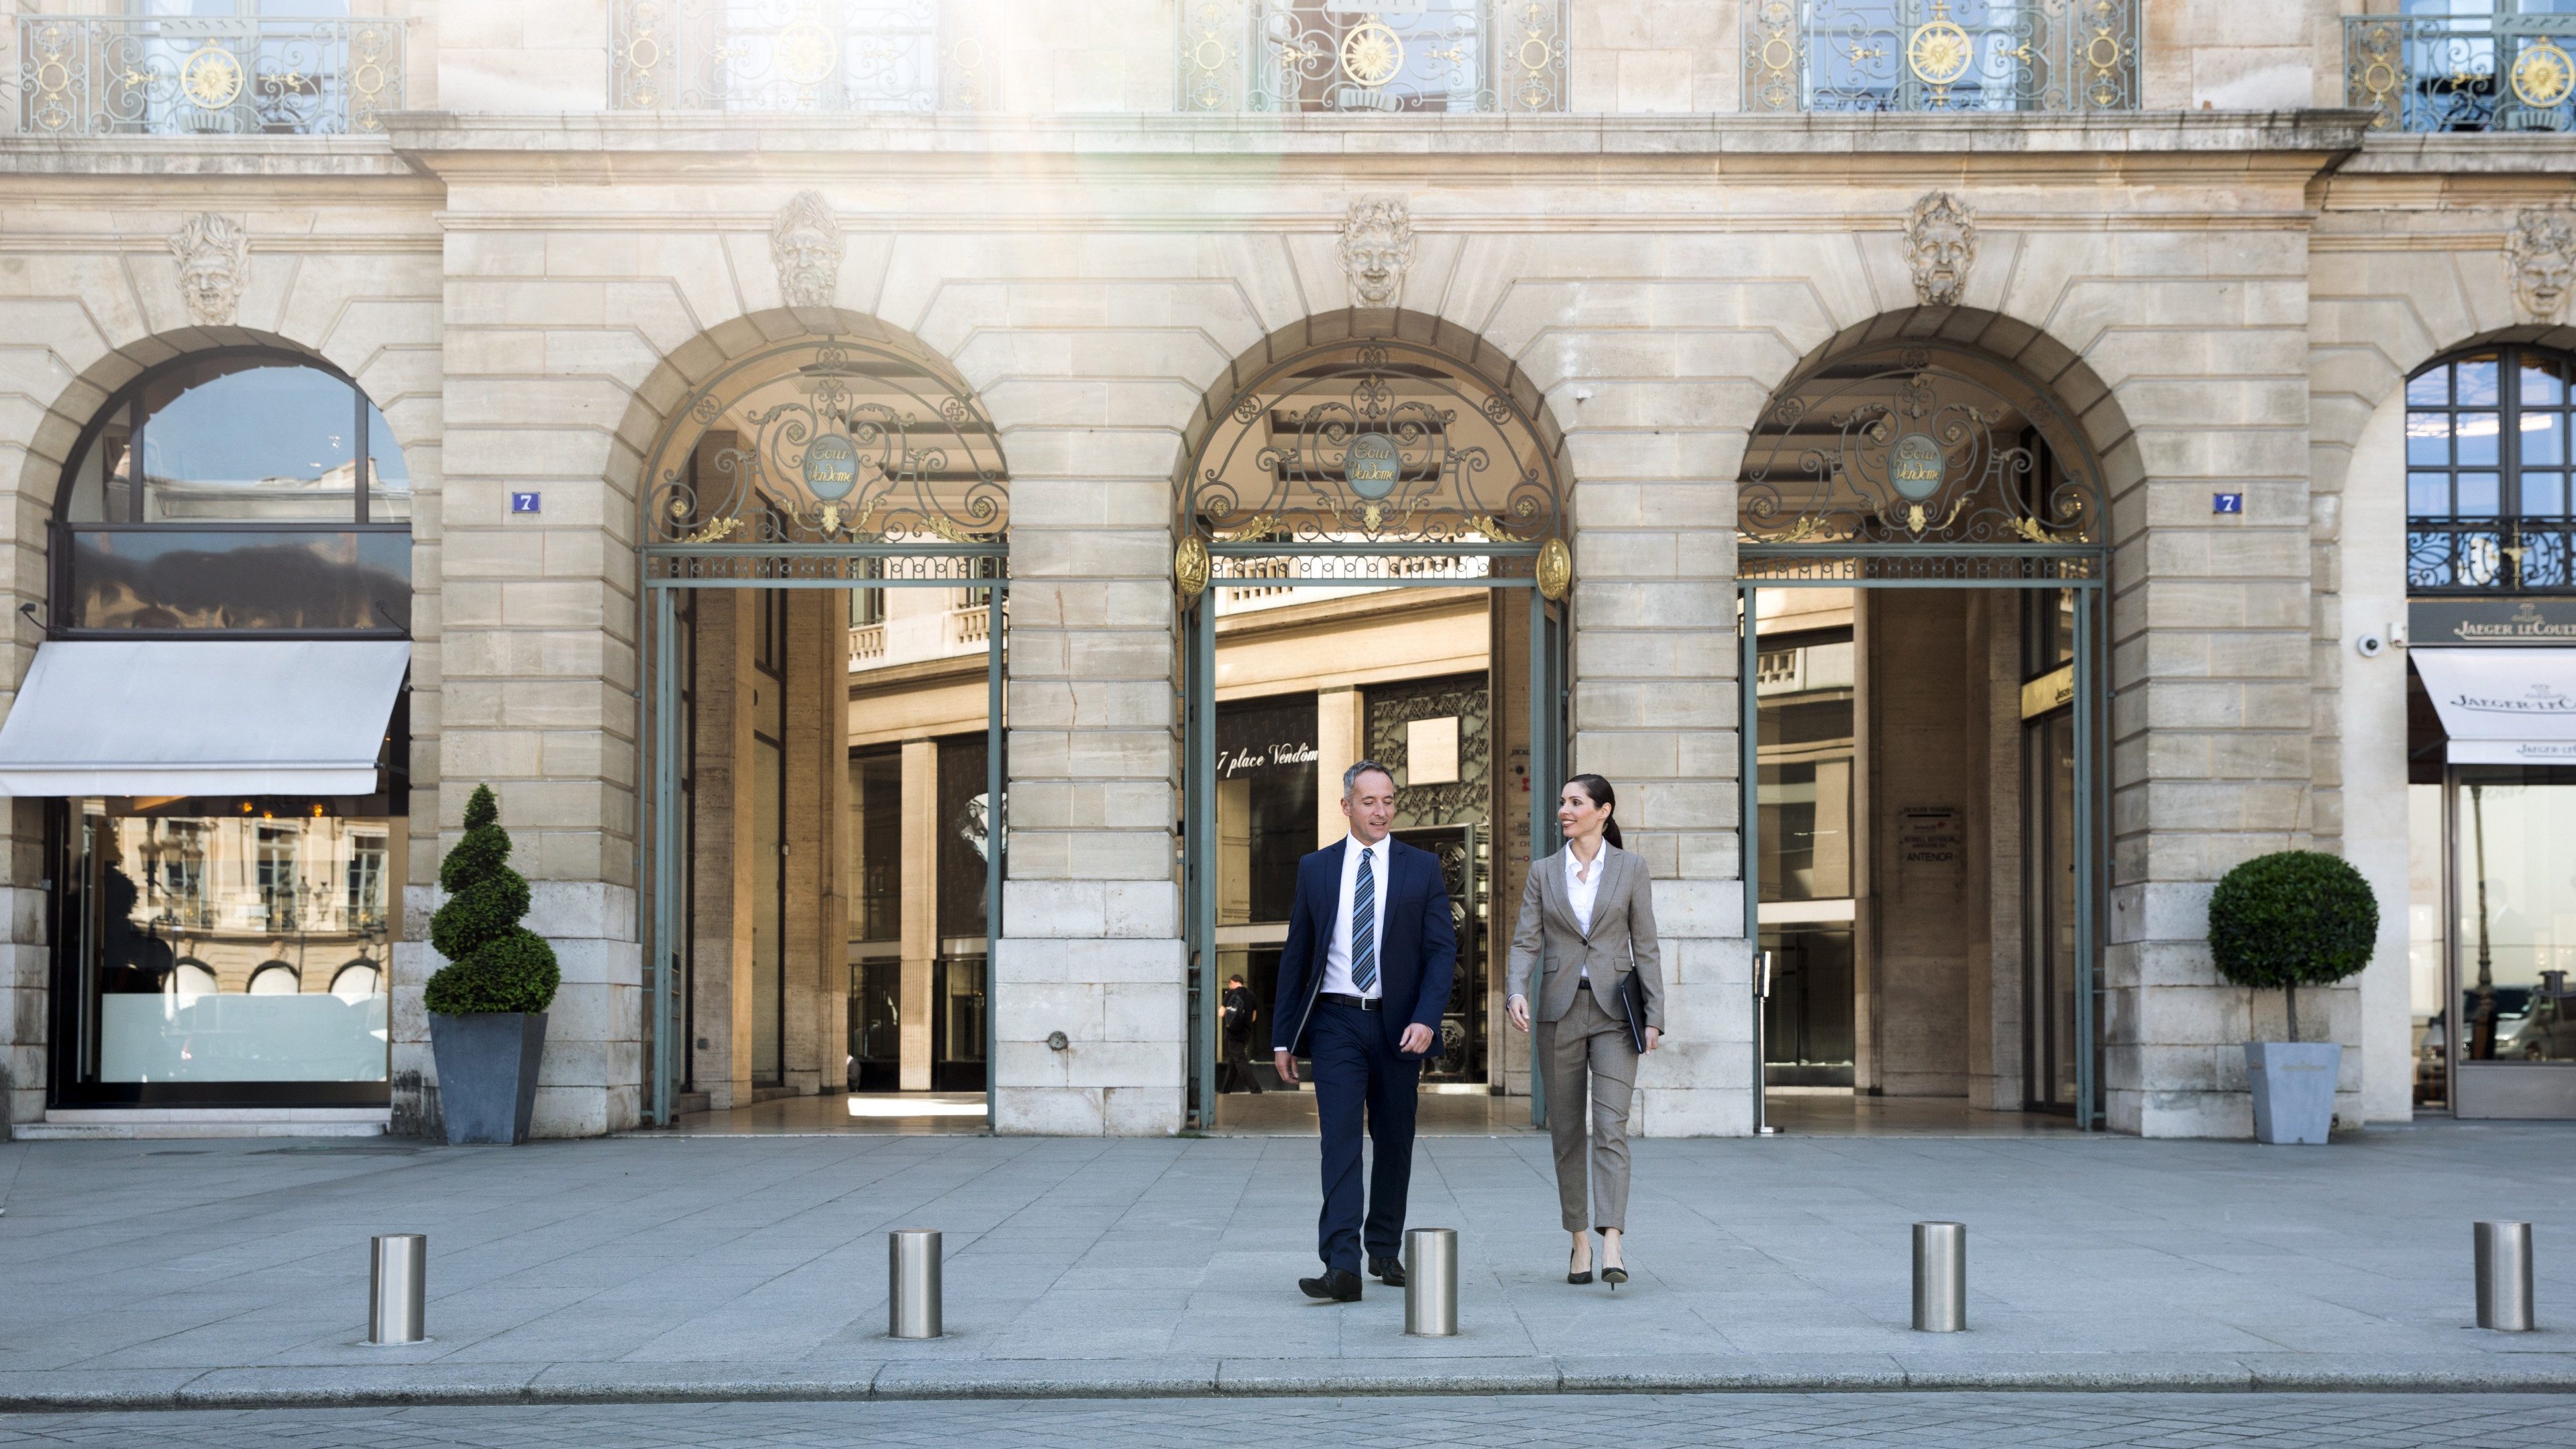 Group of four consisting of two women and two men in business attire on a square in front of a prestigious building façade. The sun’s rays are reflected in one of the windows in the background. Conversation between two men and a woman.